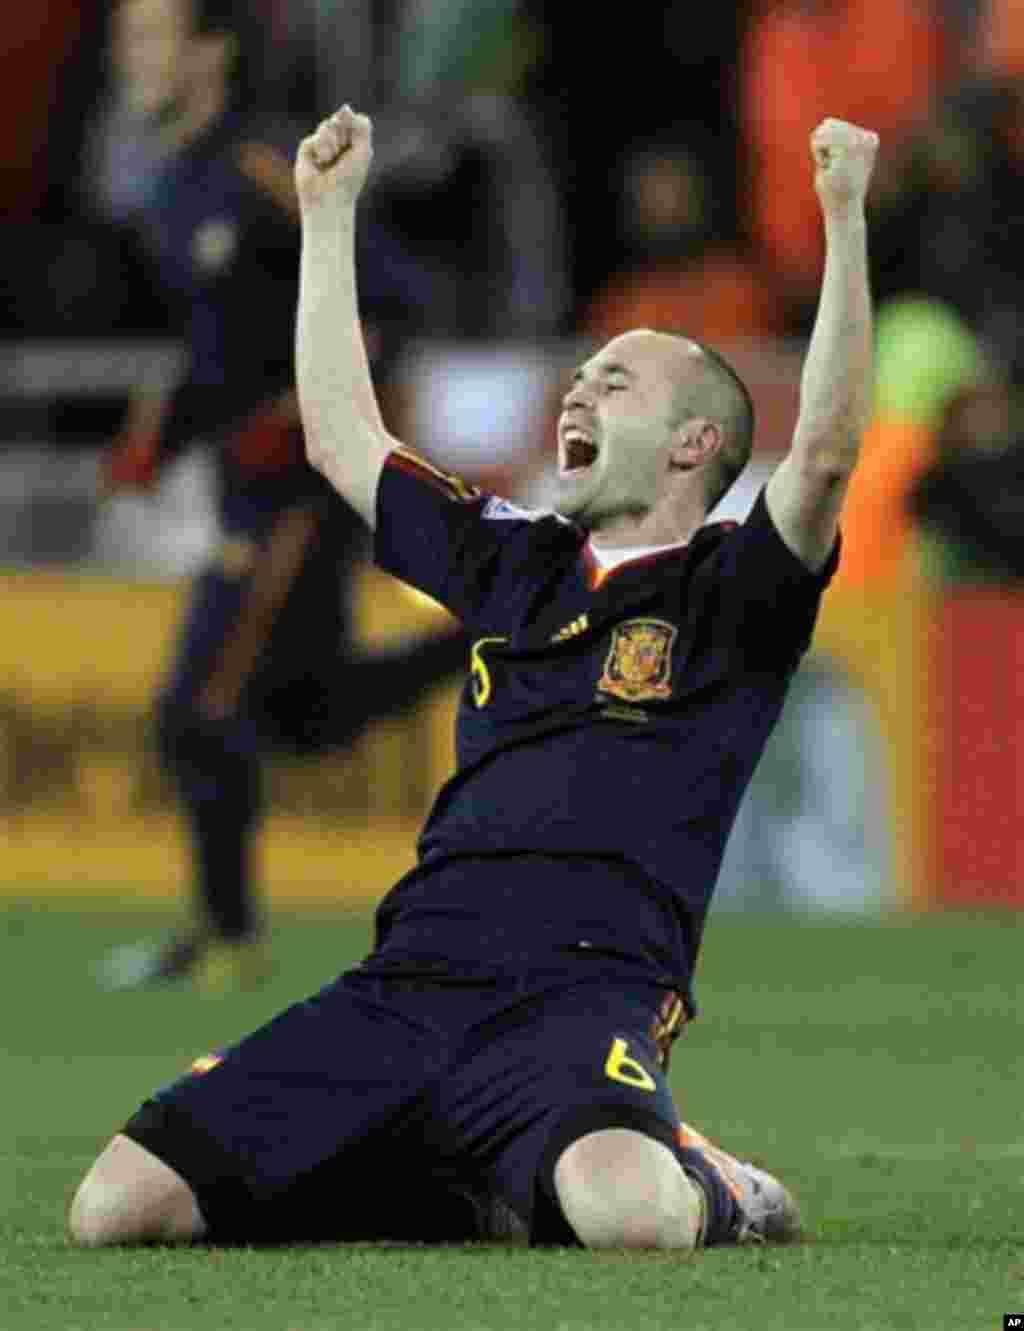 Spain's Andres Iniesta celebrates after scoring a goal during the World Cup final soccer match between the Netherlands and Spain at Soccer City in Johannesburg, South Africa, Sunday, July 11, 2010. Spain won 1-0. (AP Photo/Matt Dunham)